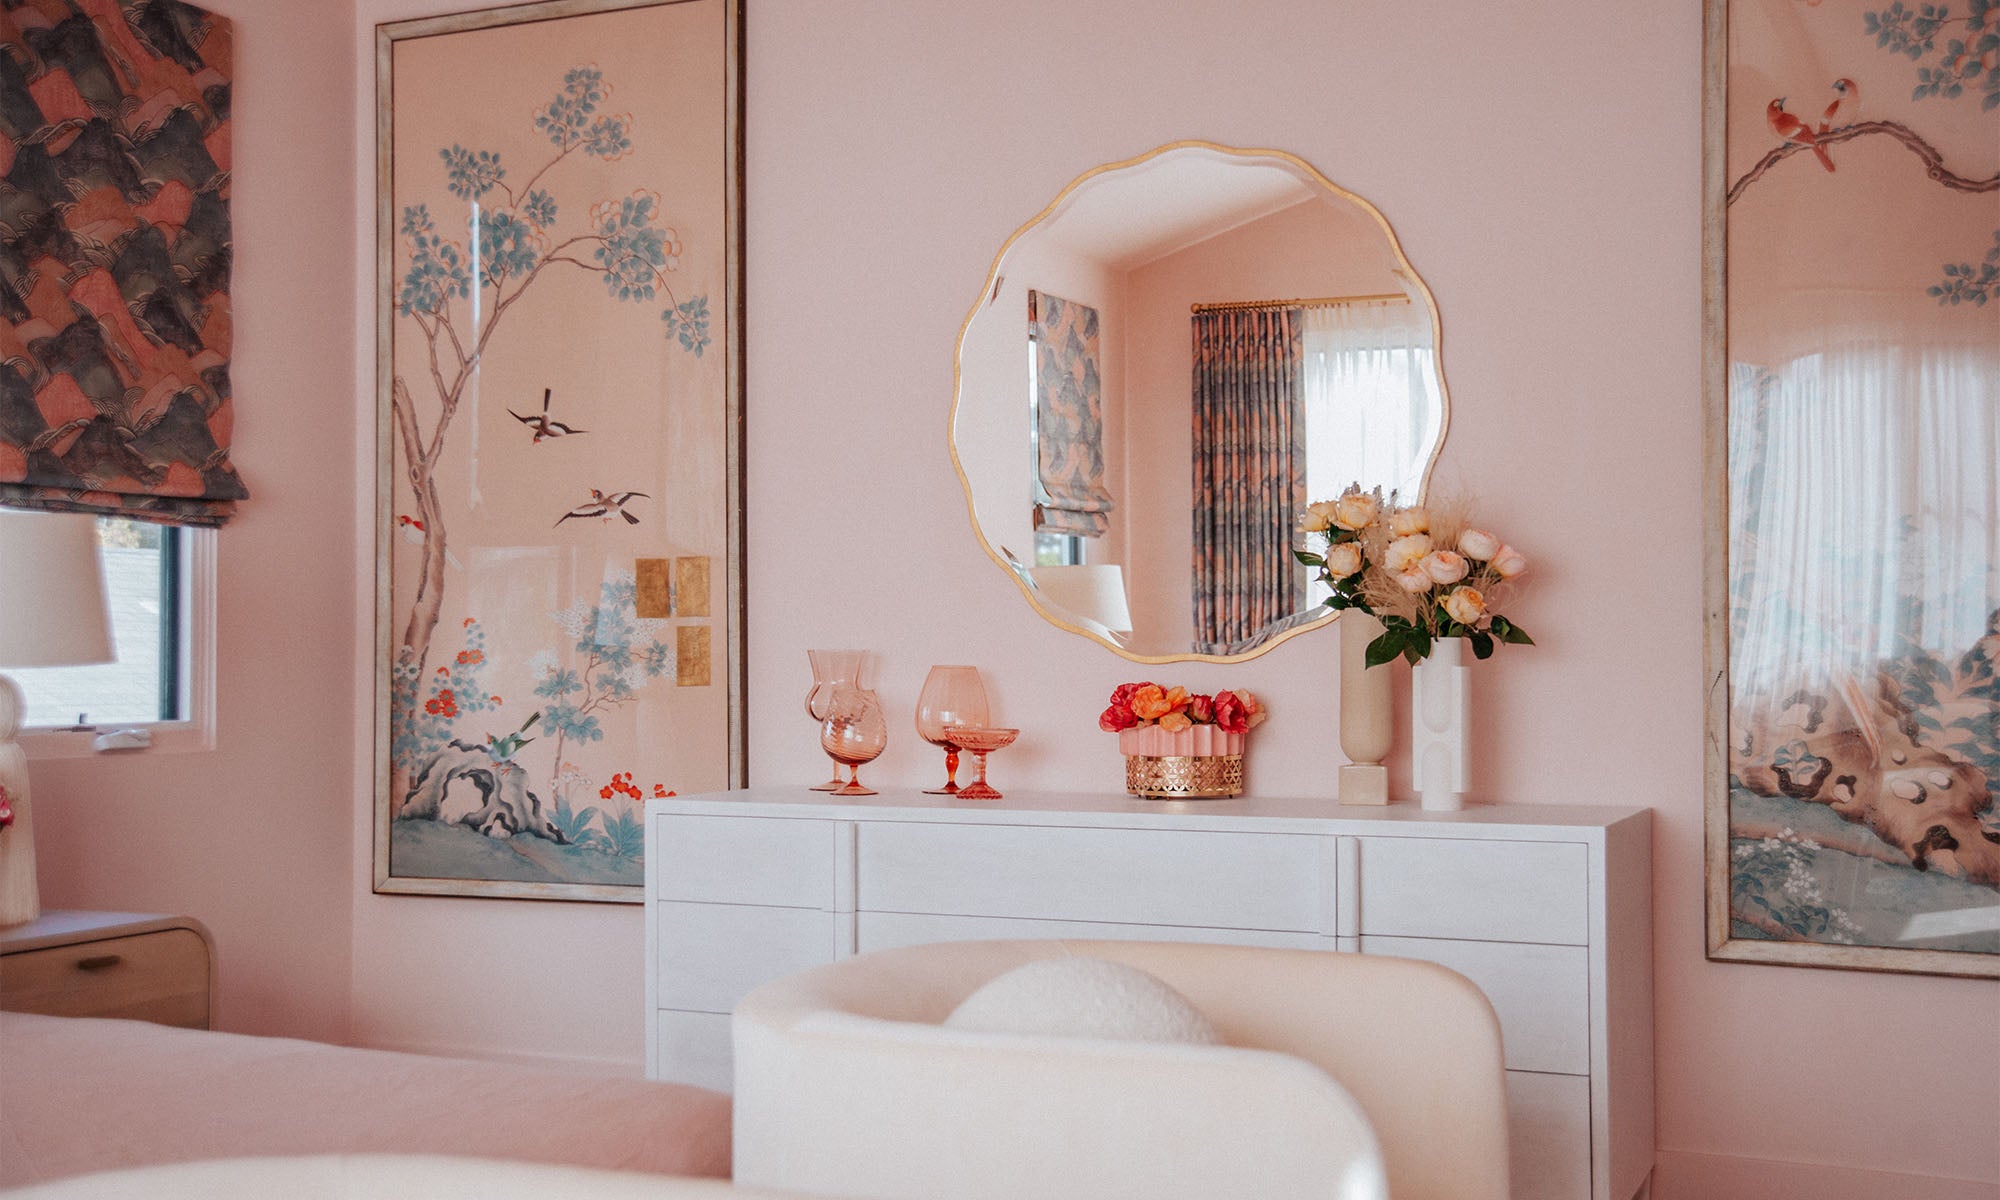 Claire Thomas and Bryce Dallas Howard Dream Up a Pastel, Playful Home